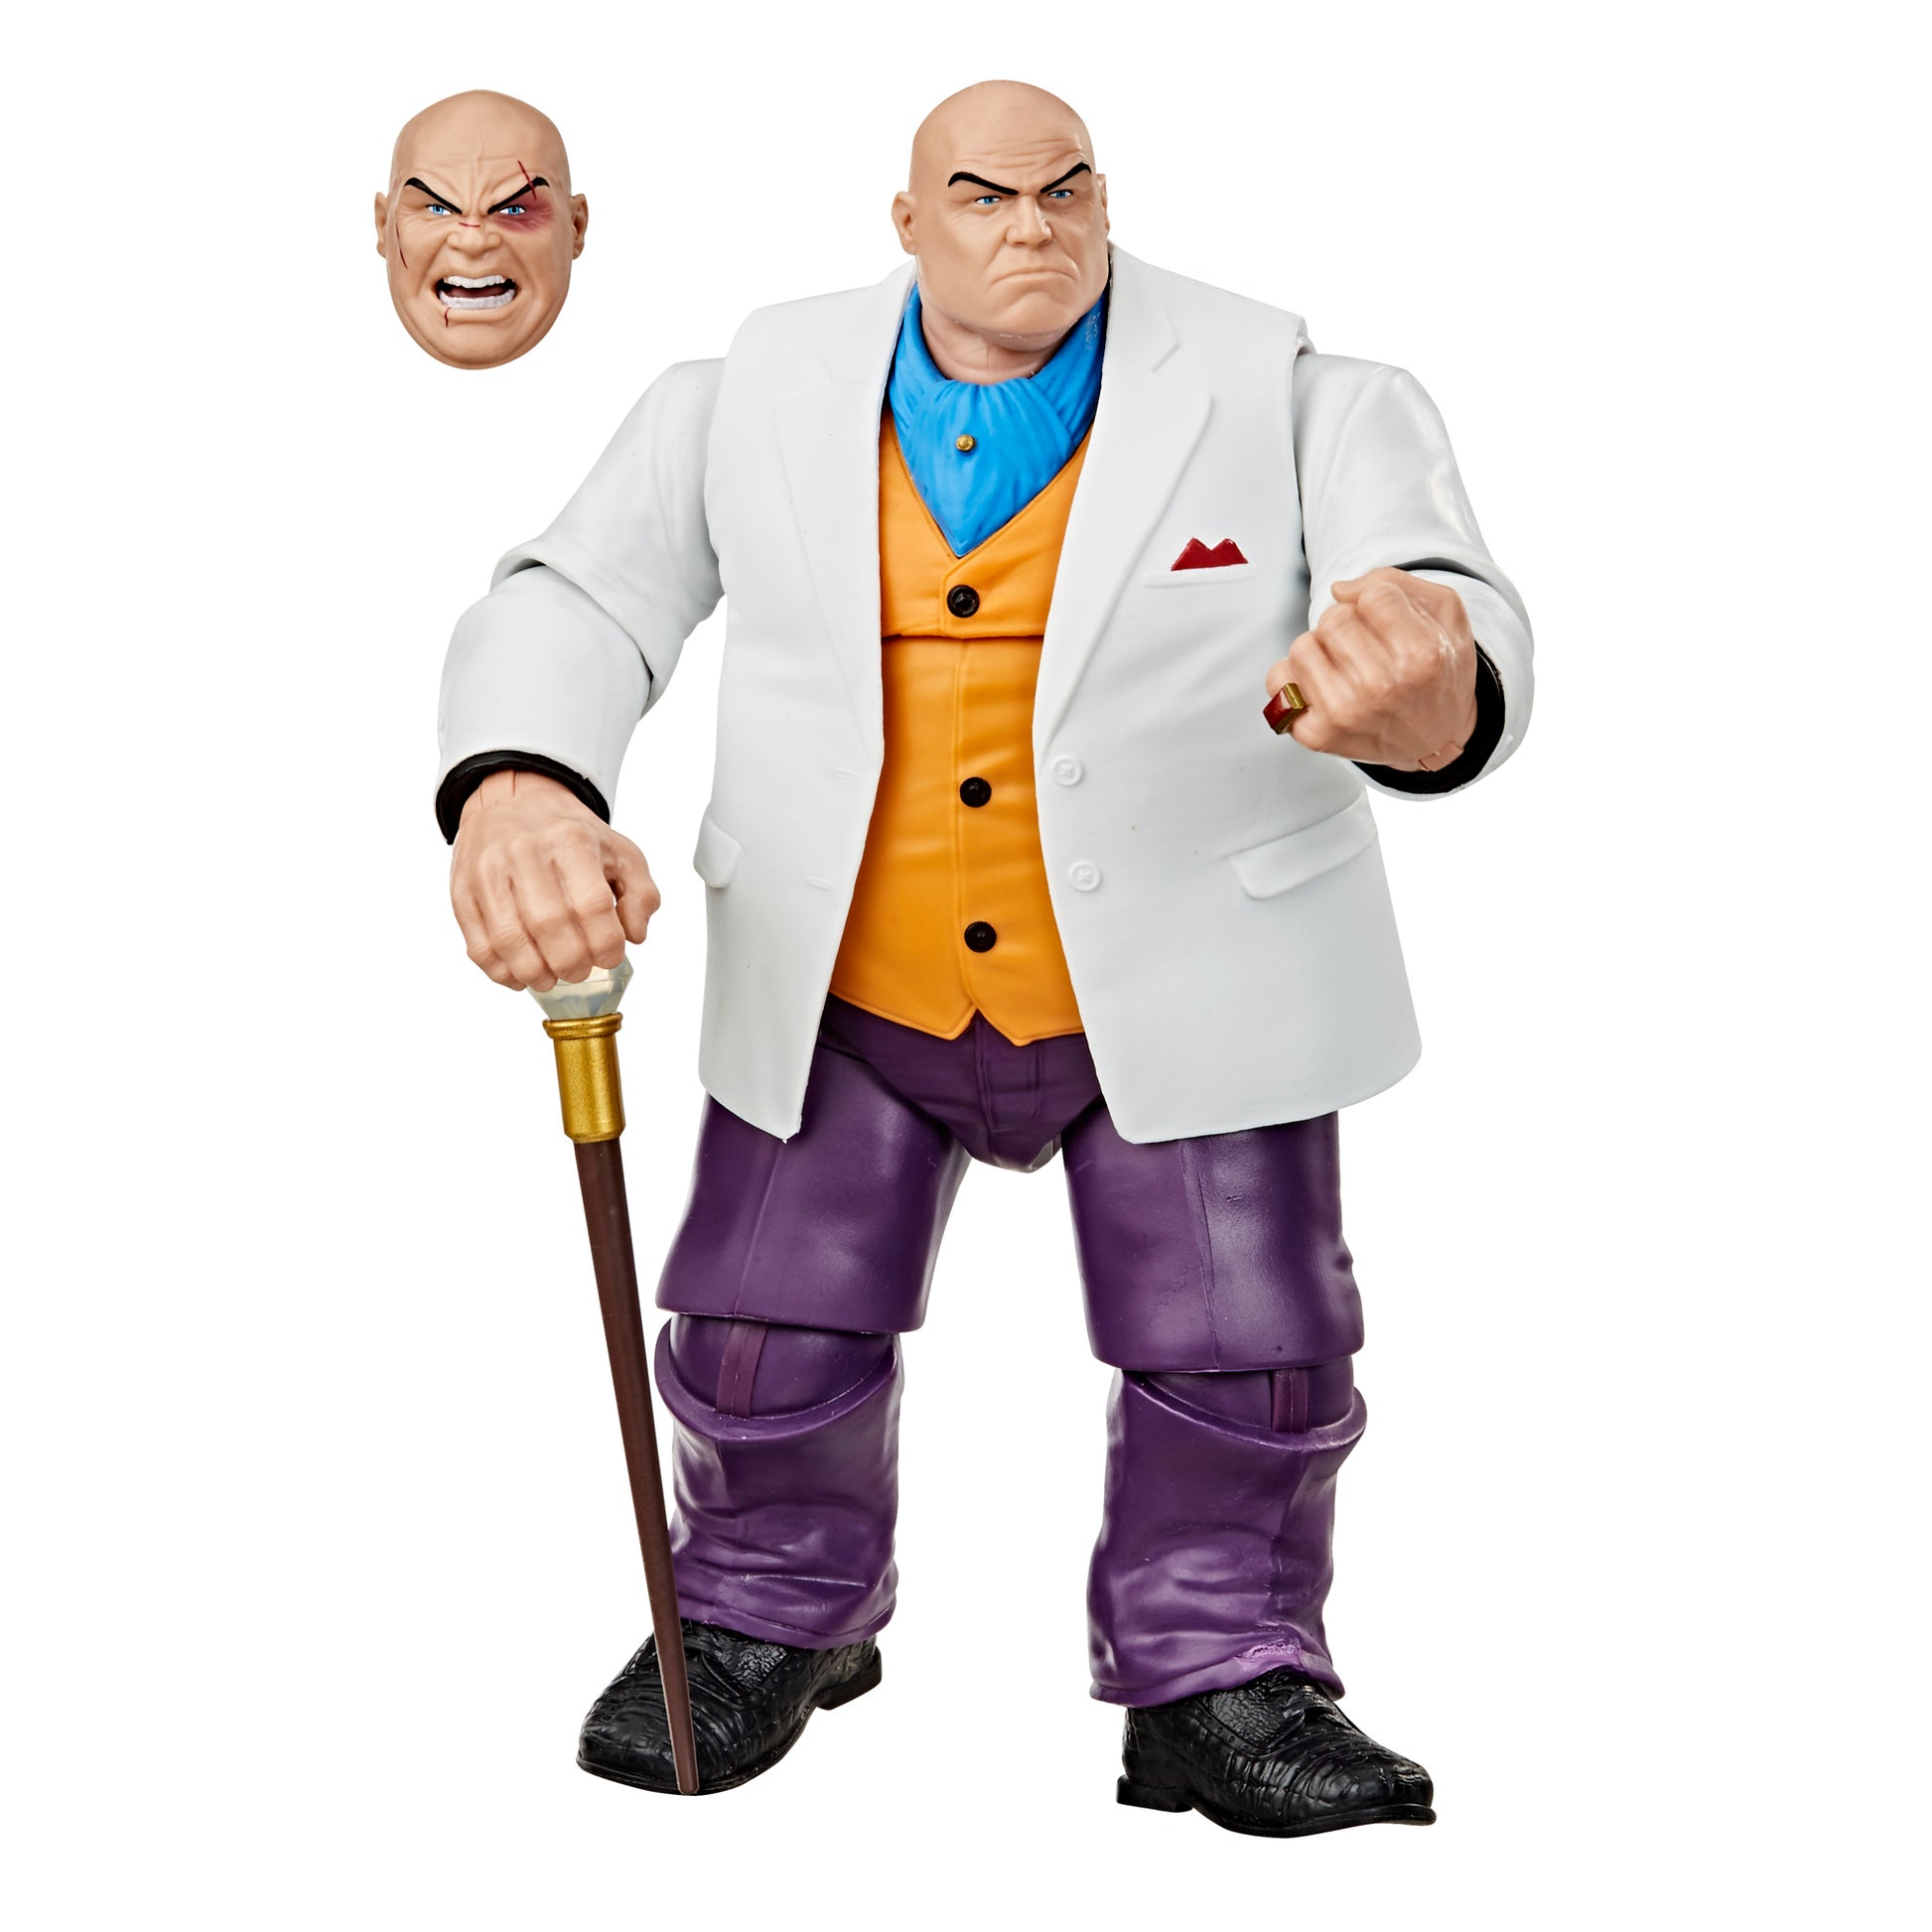 Hasbro Marvel Legends Series 6-inch Collectible Marvel’s Kingpin Action Figure Toy Vintage Collection